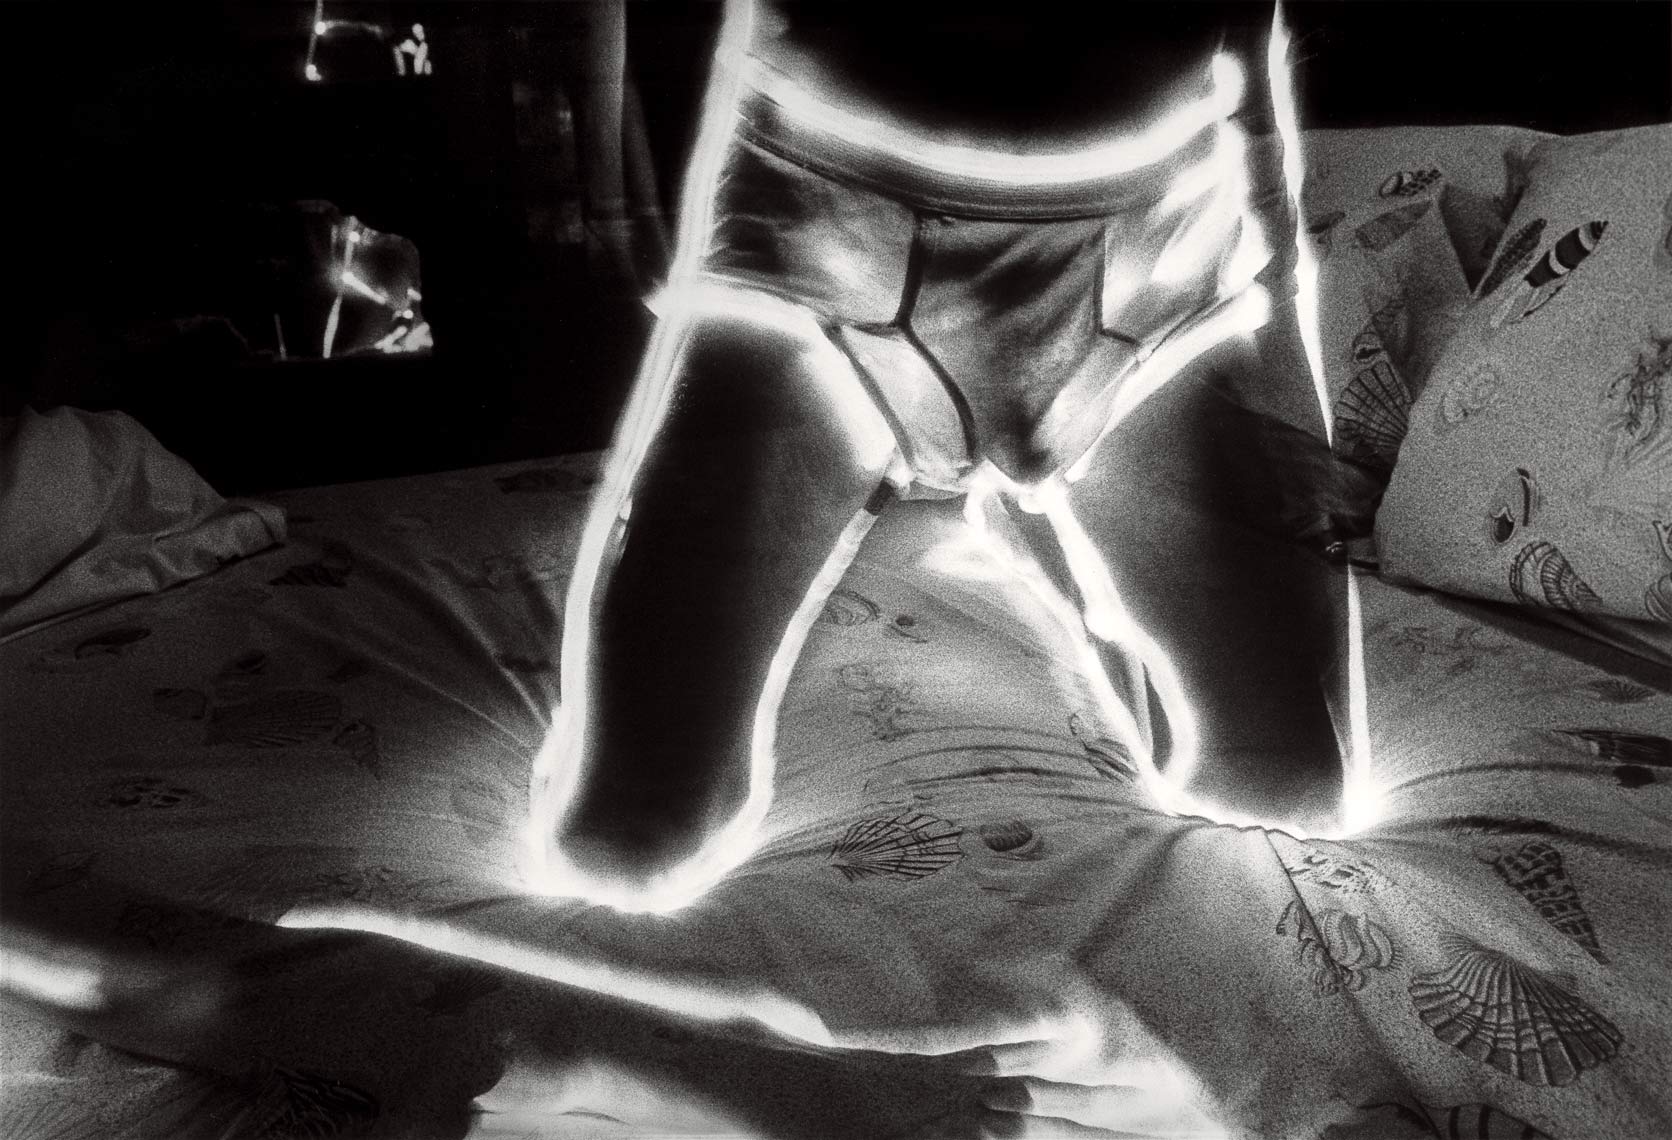 David Lebe; Underpants, 1981, male nude, light drawing, black and white photograph